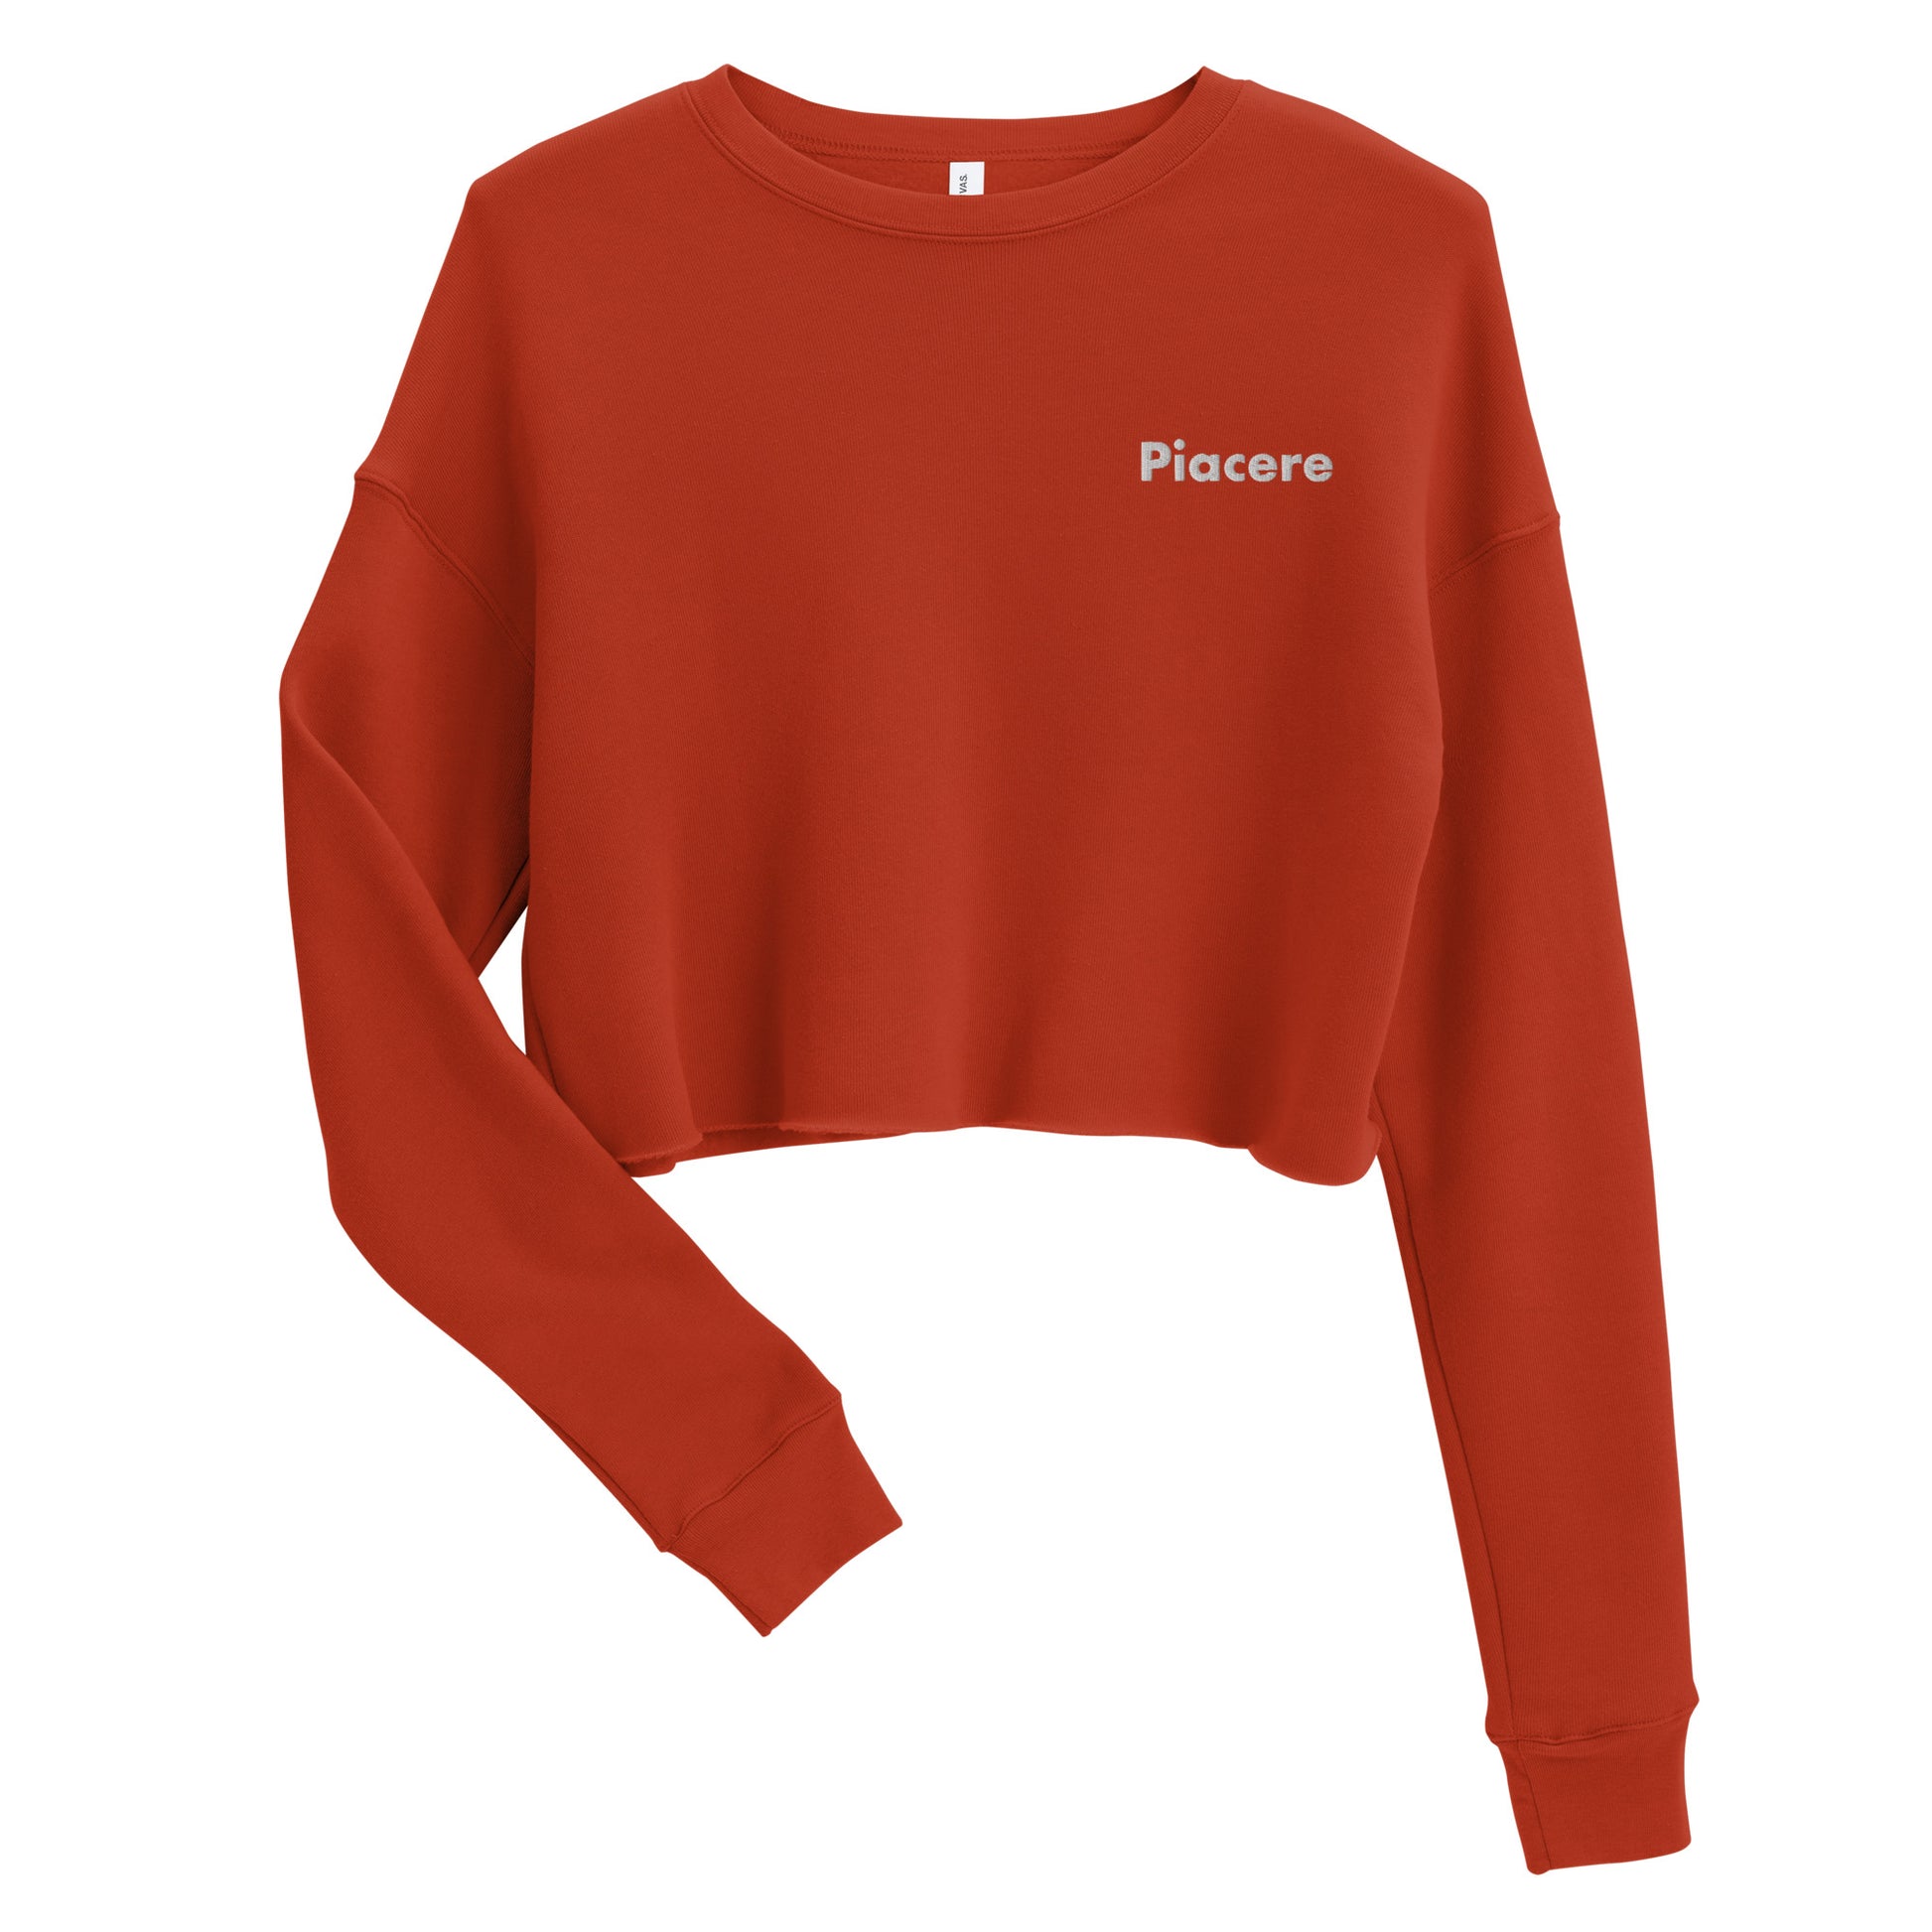 Hi Cropped Sweatshirt from Happy interactions in Red Piacere — Pleased to meet you in Italian